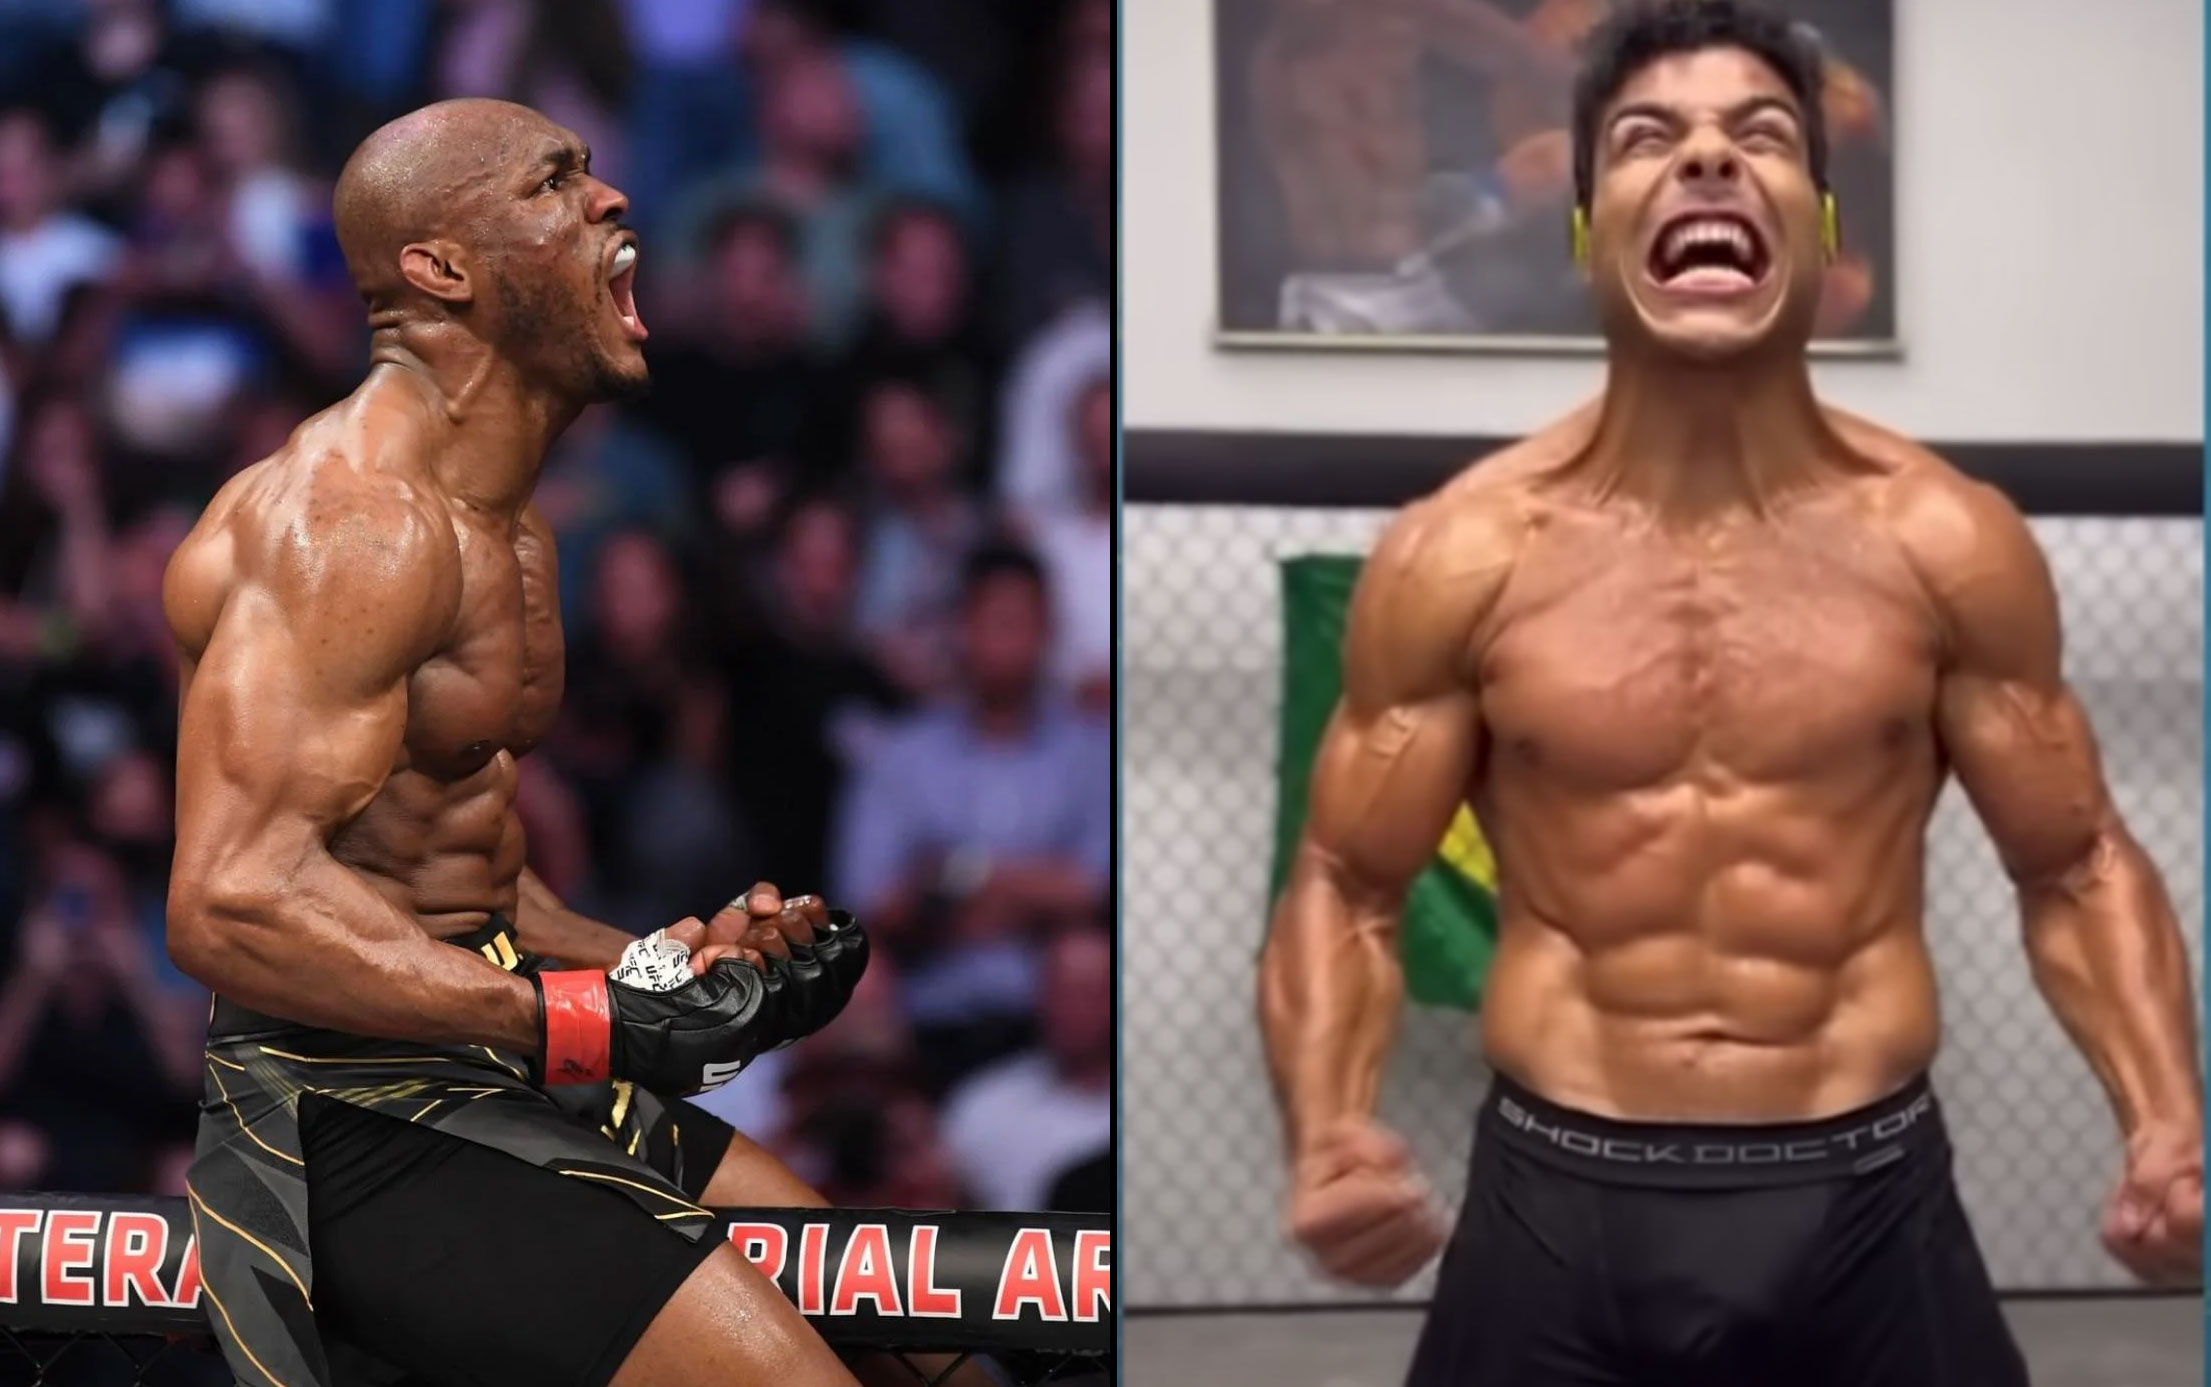 MMA Fighters that are definitely taking steroids and lots of it! 